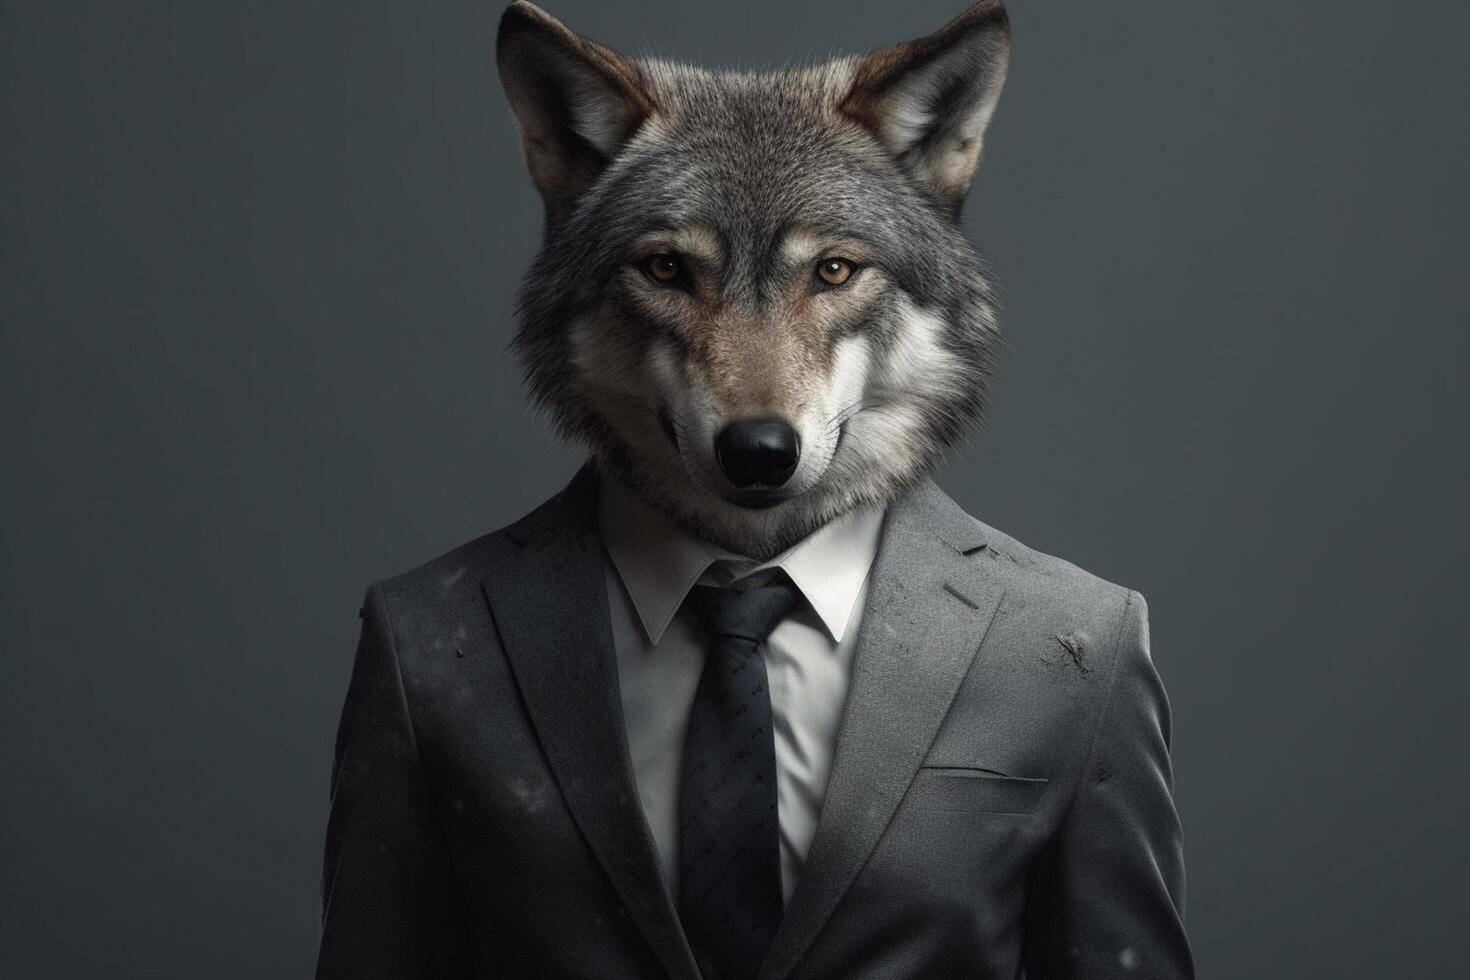 Portrait of a wolfdog in a suit on an dark background photo